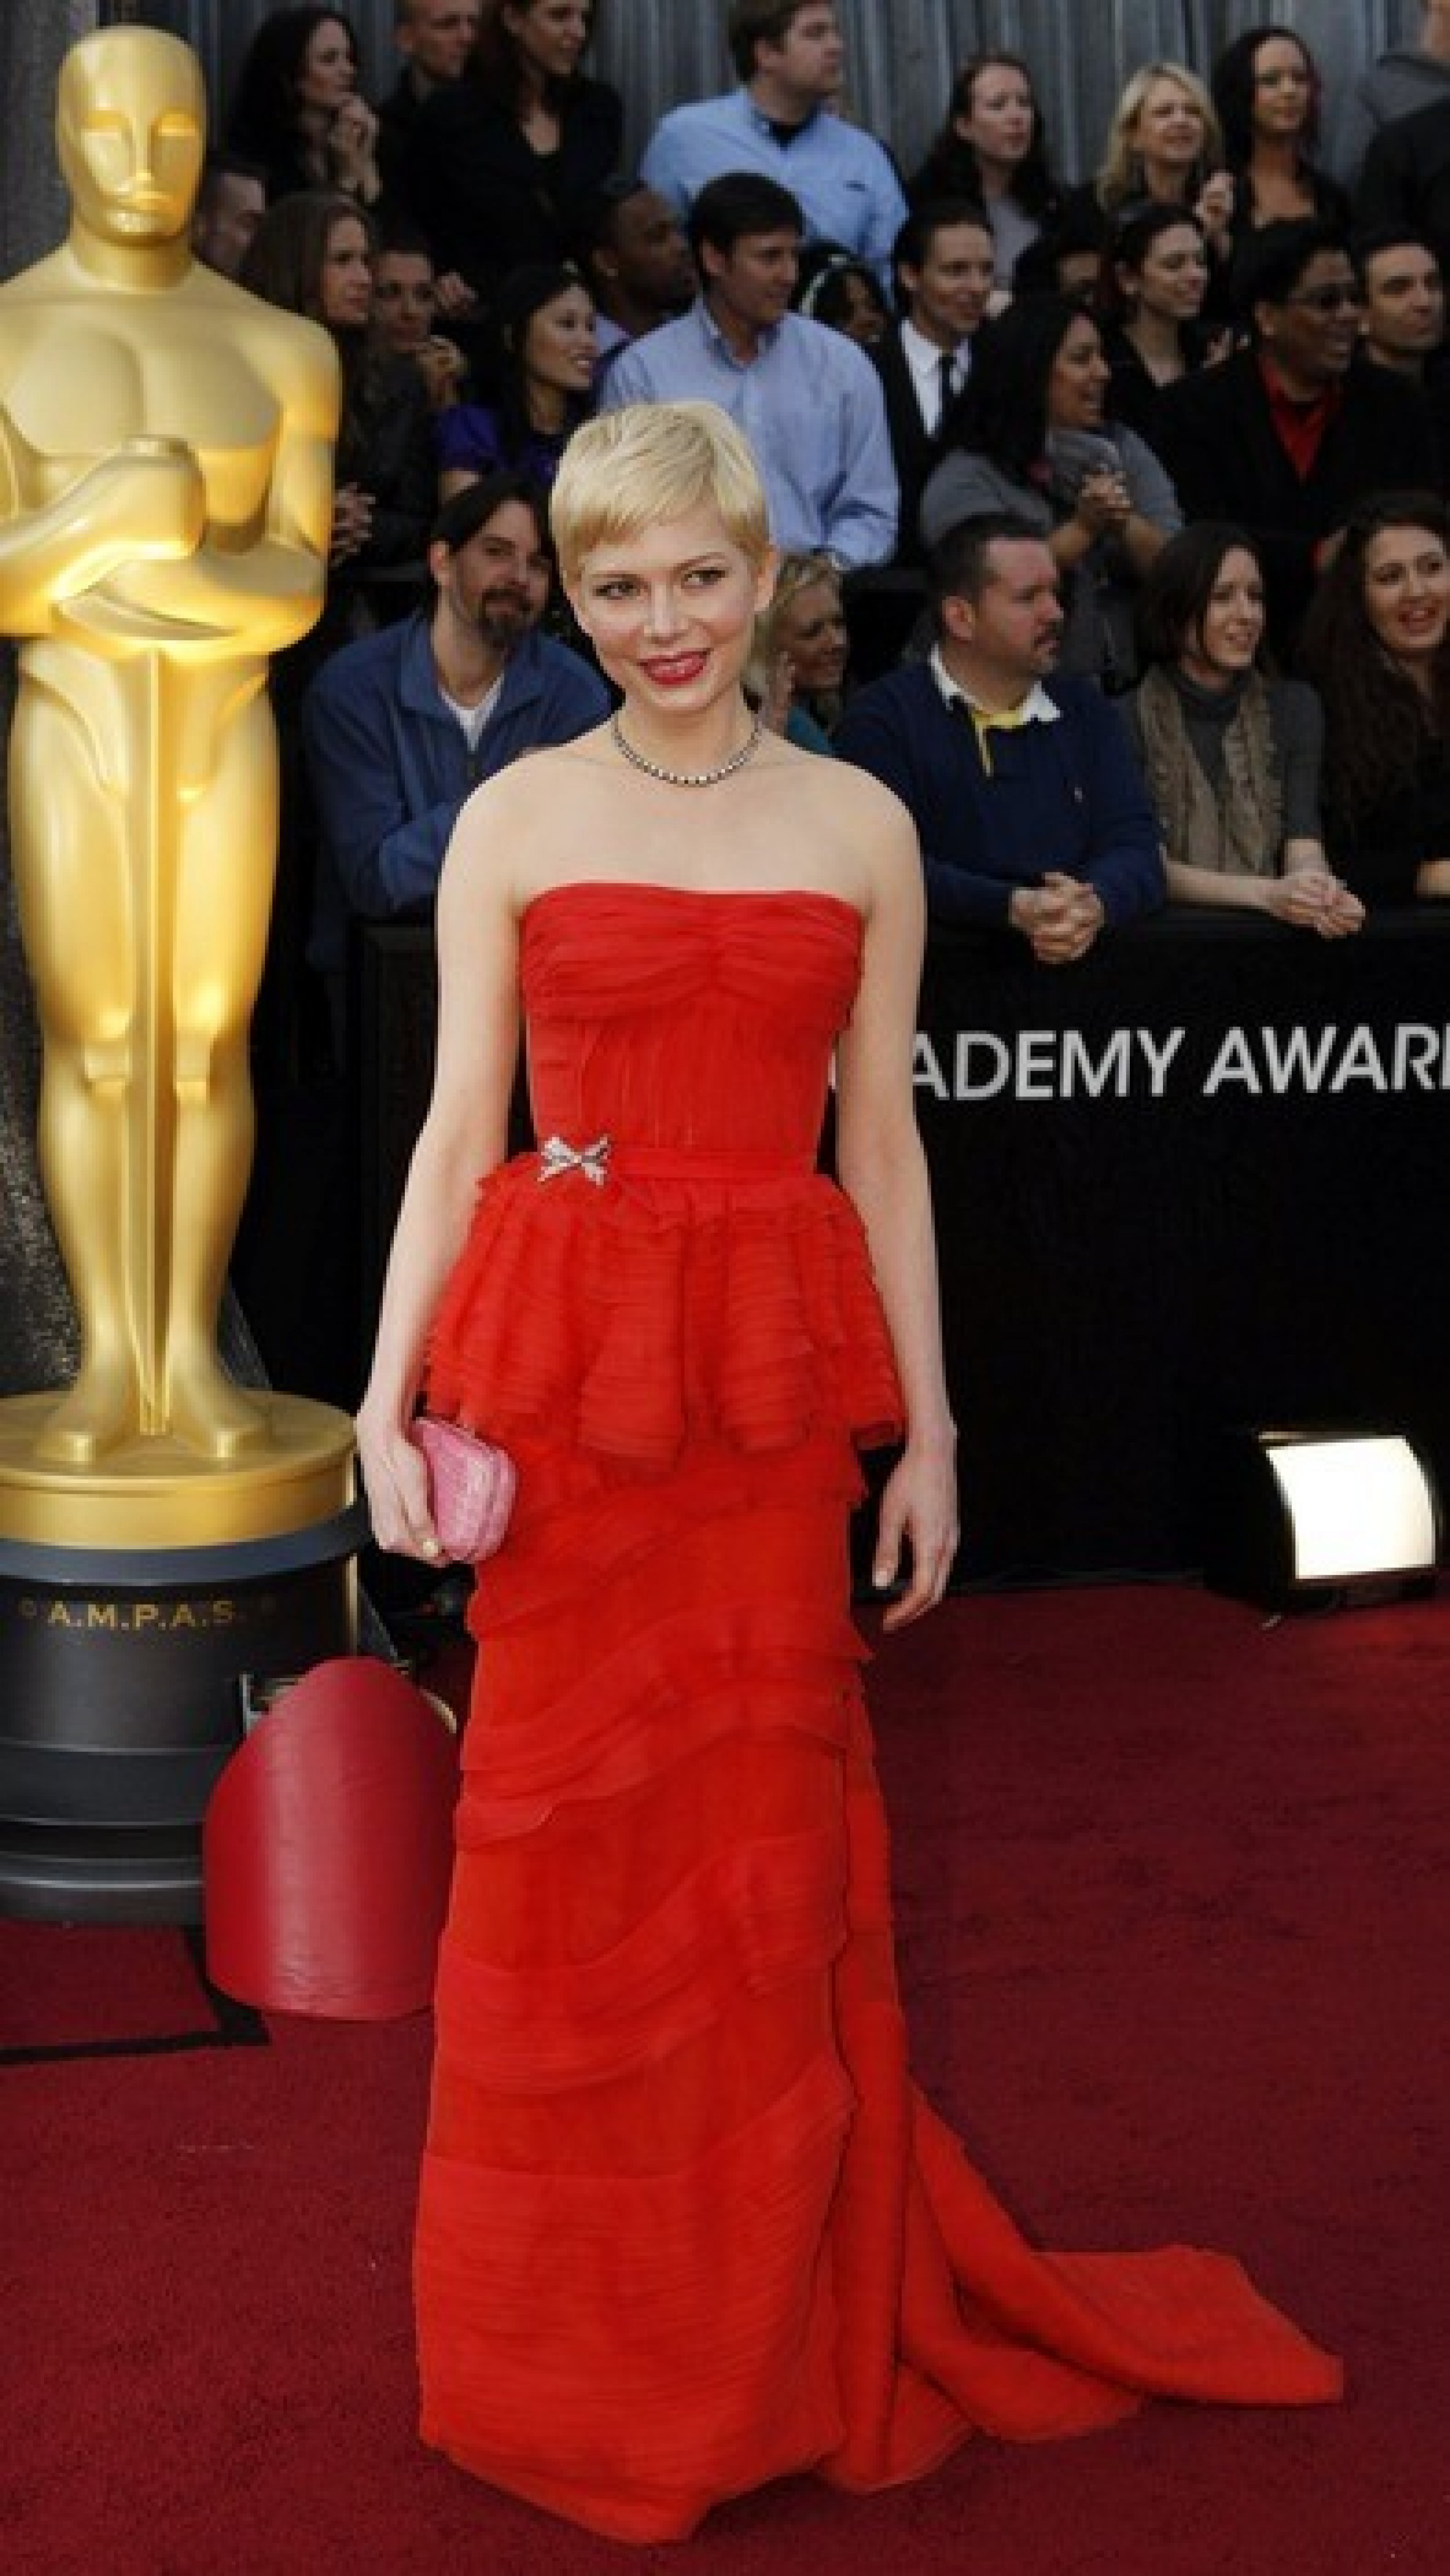 Michelle Williams, best actress nominee for her role in quotMy Week with Marilynquot, arrives on the red carpet at the 84th Academy Awards in Hollywood, California, February 26, 2012.